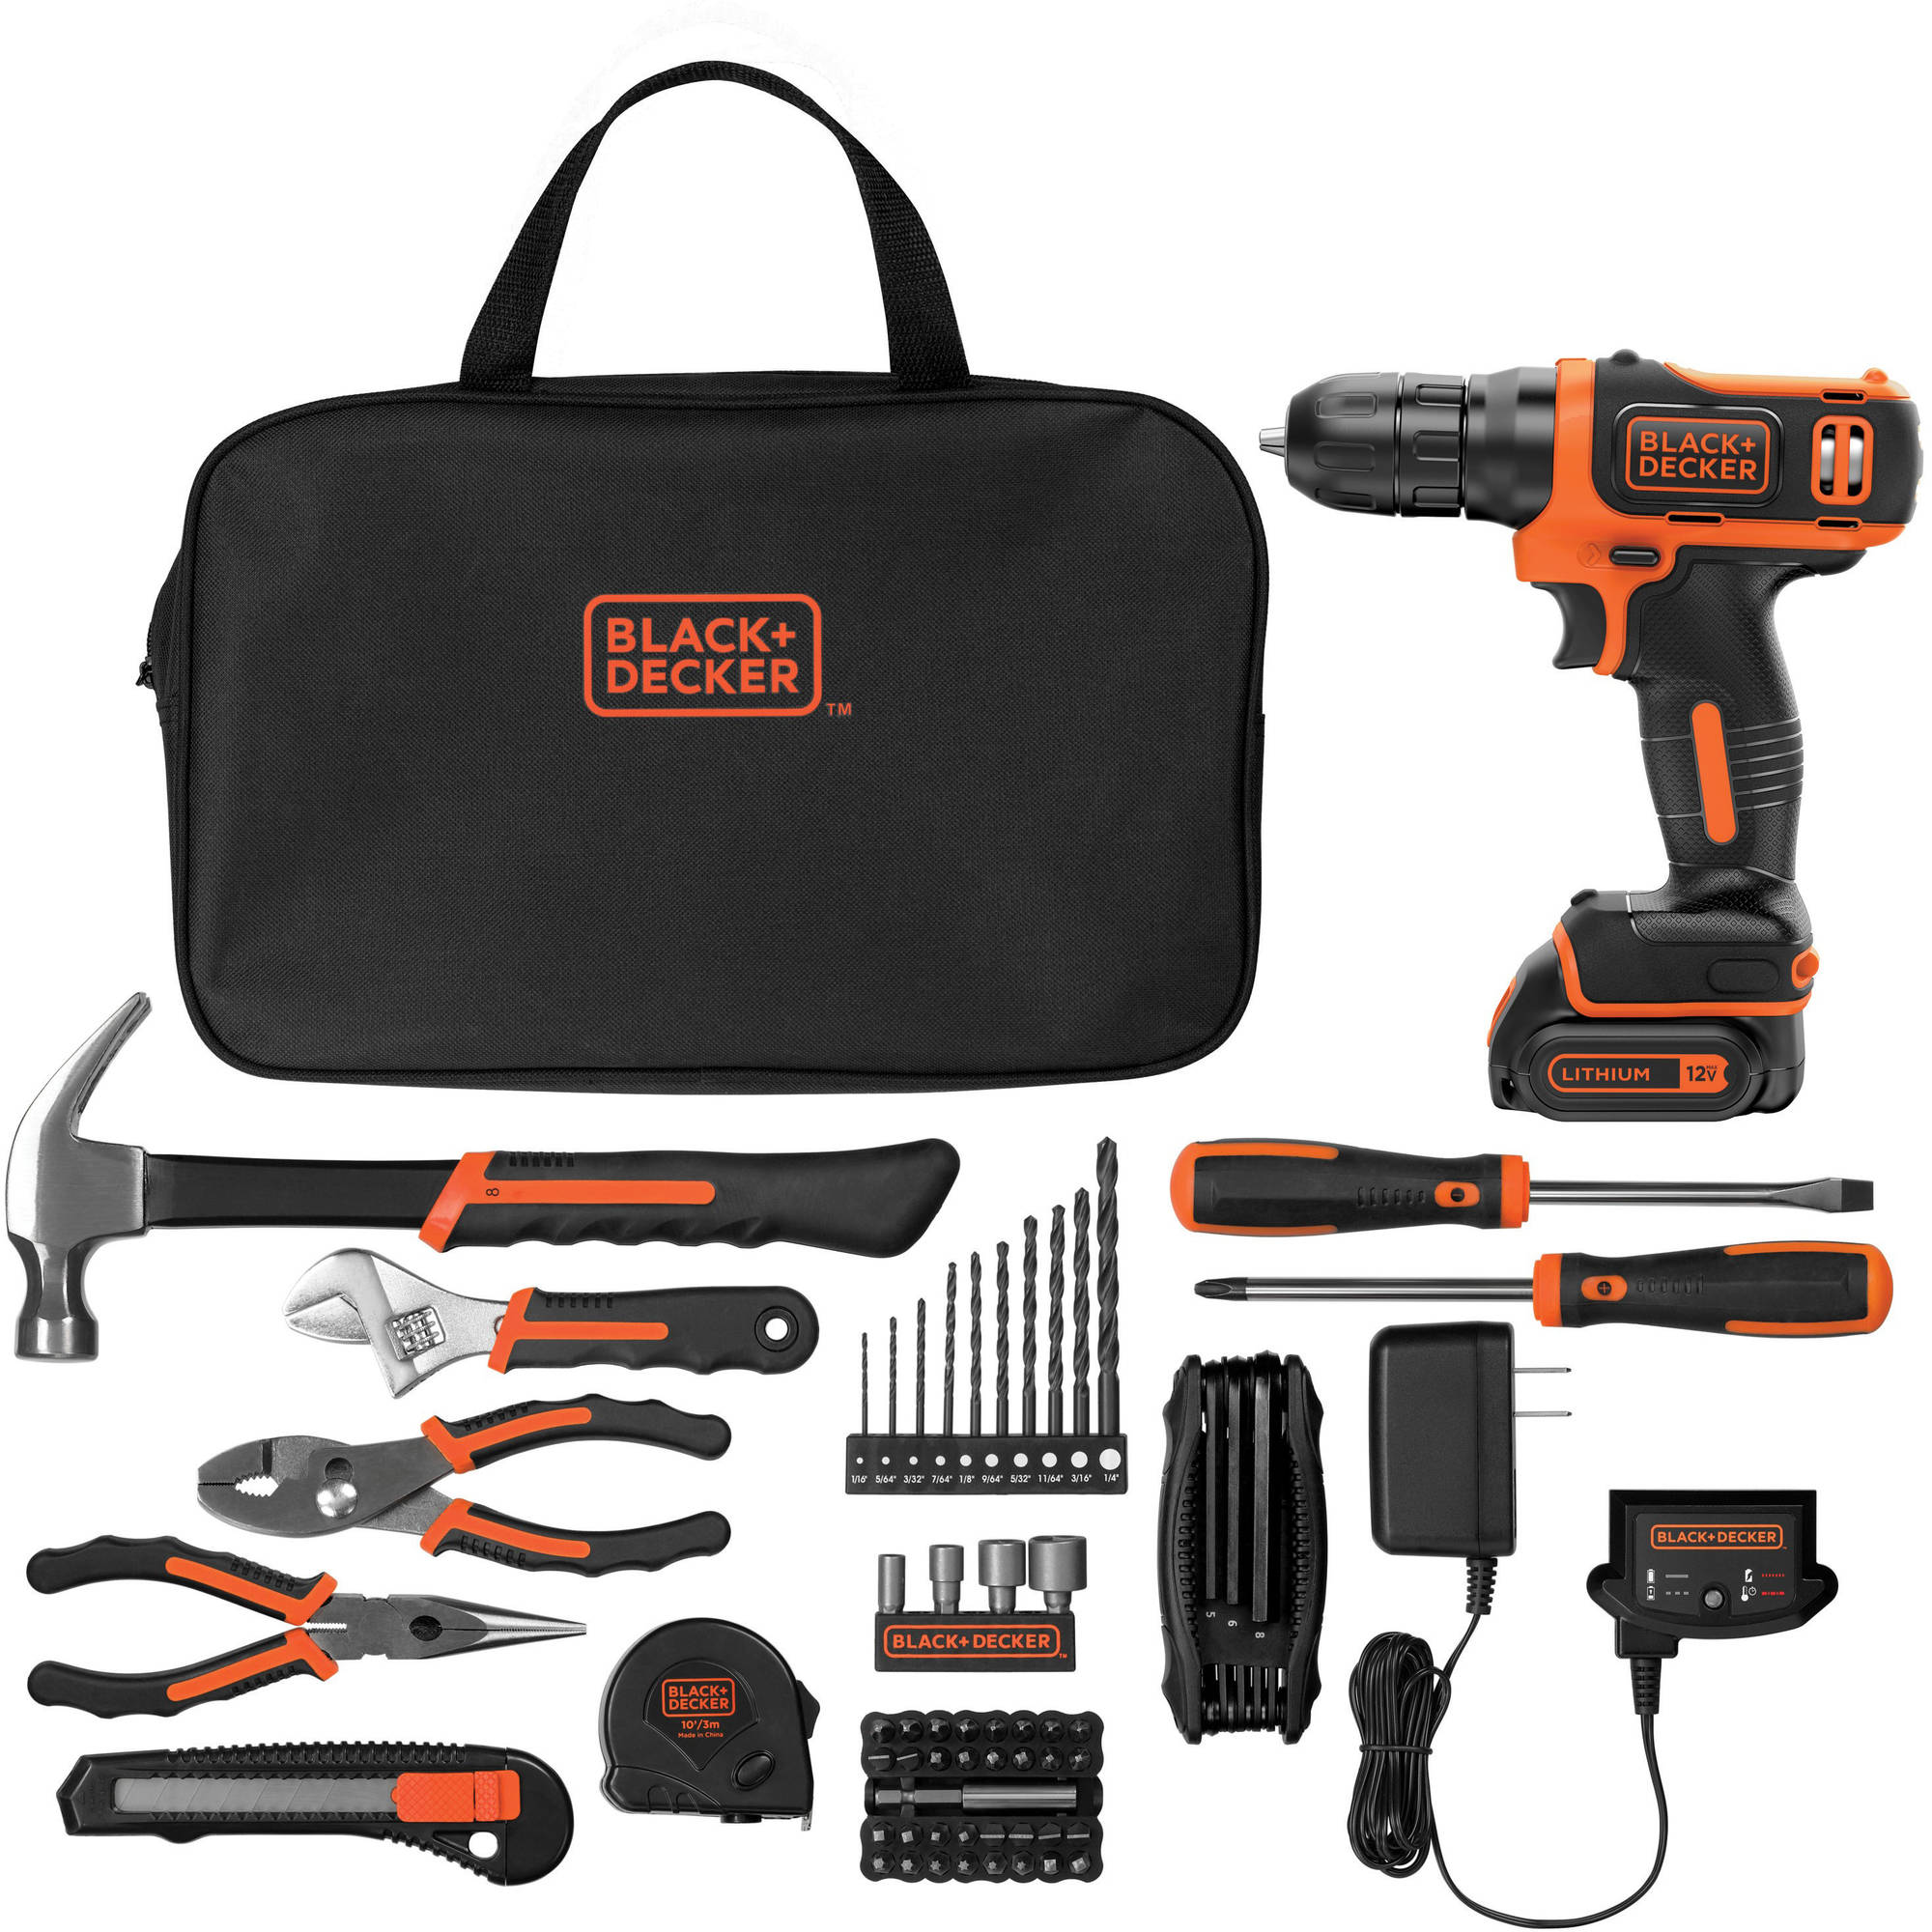 BLACK+DECKER 12-Volt MAX* Lithium-Ion Cordless Drill With 64-Piece Project Kit, BDCD11264PKWM - image 1 of 5